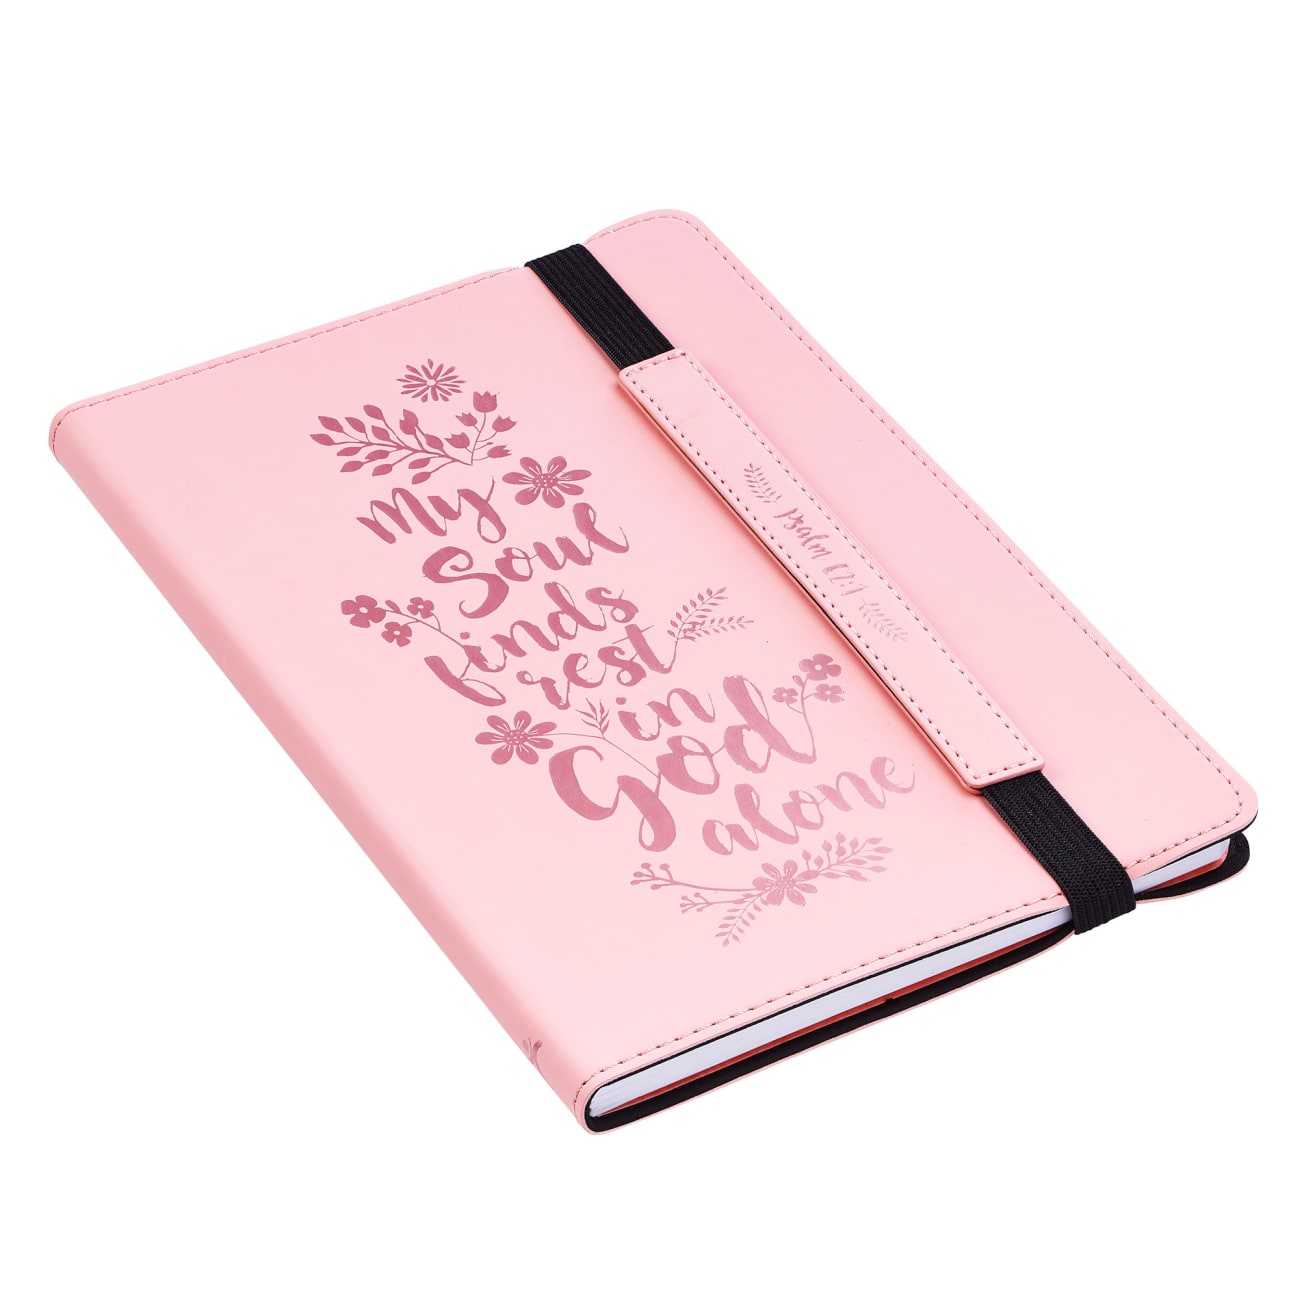 Dot Grid Journal: My Soul Finds, Pink With Elastic Closure Imitation Leather